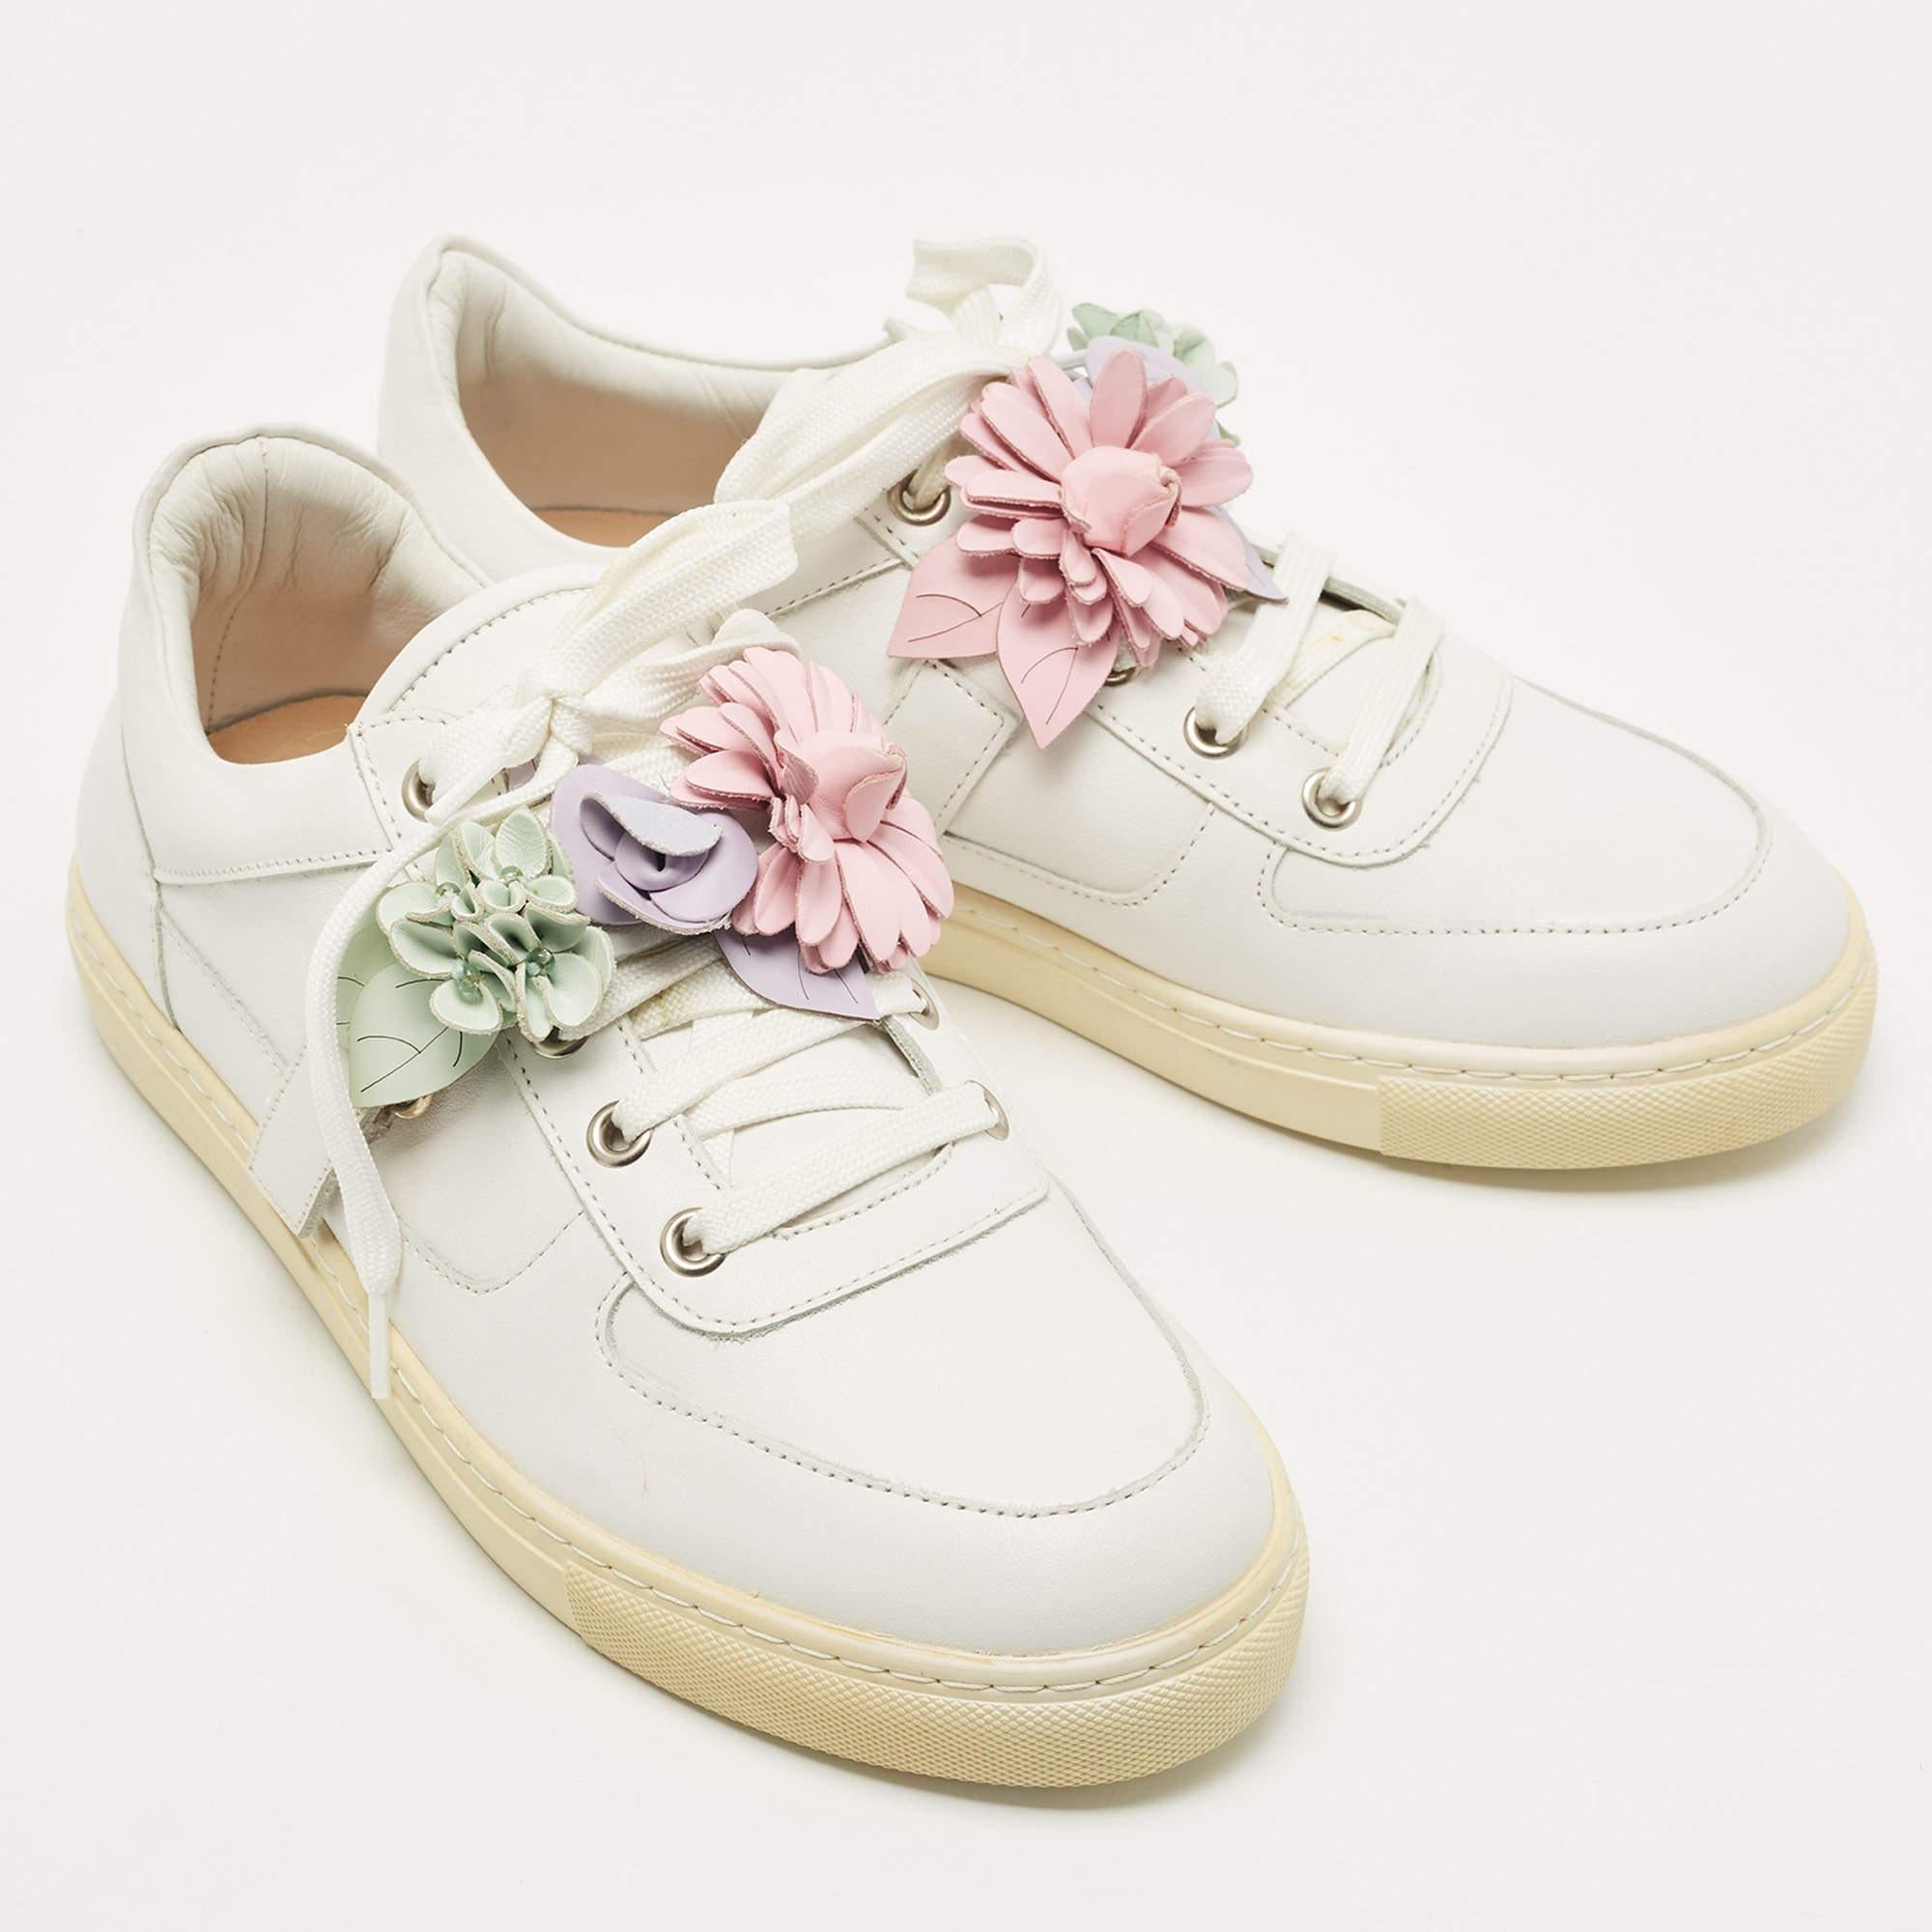 Sophia Webster White Leather Lilico Flower Low Top Sneakers Size 39 In Excellent Condition In Dubai, Al Qouz 2